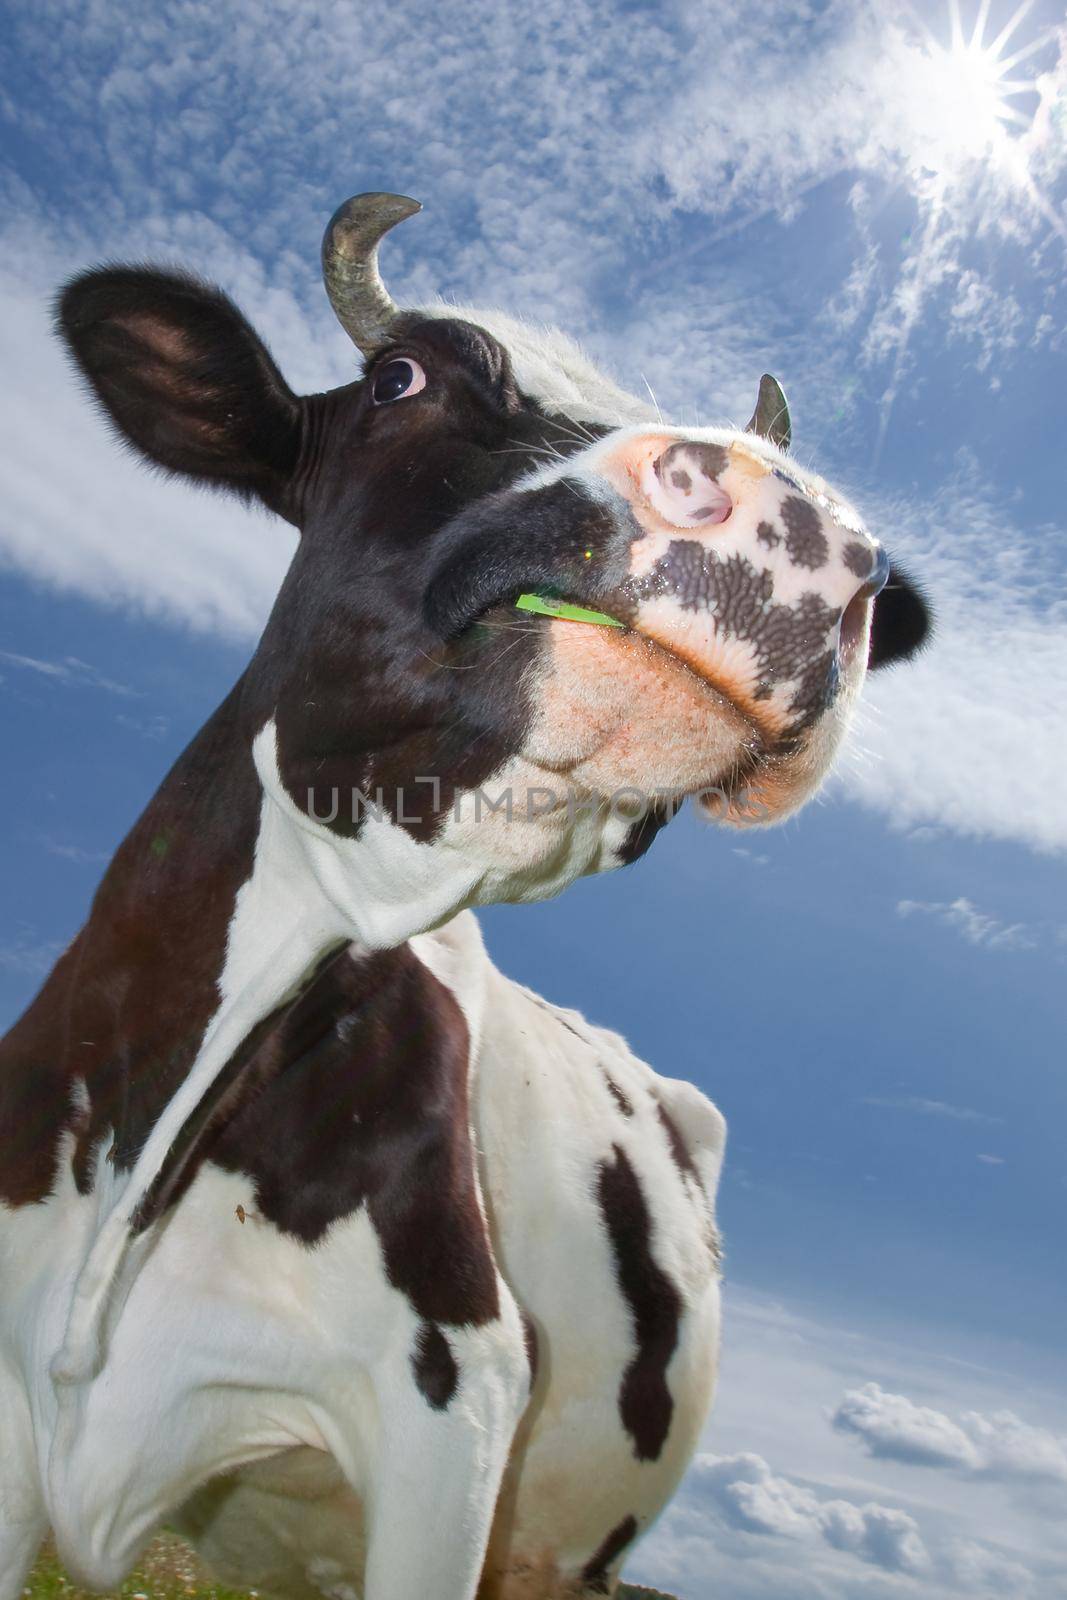 Funny cow with grass in the mouth in a blue sky with clouds background
